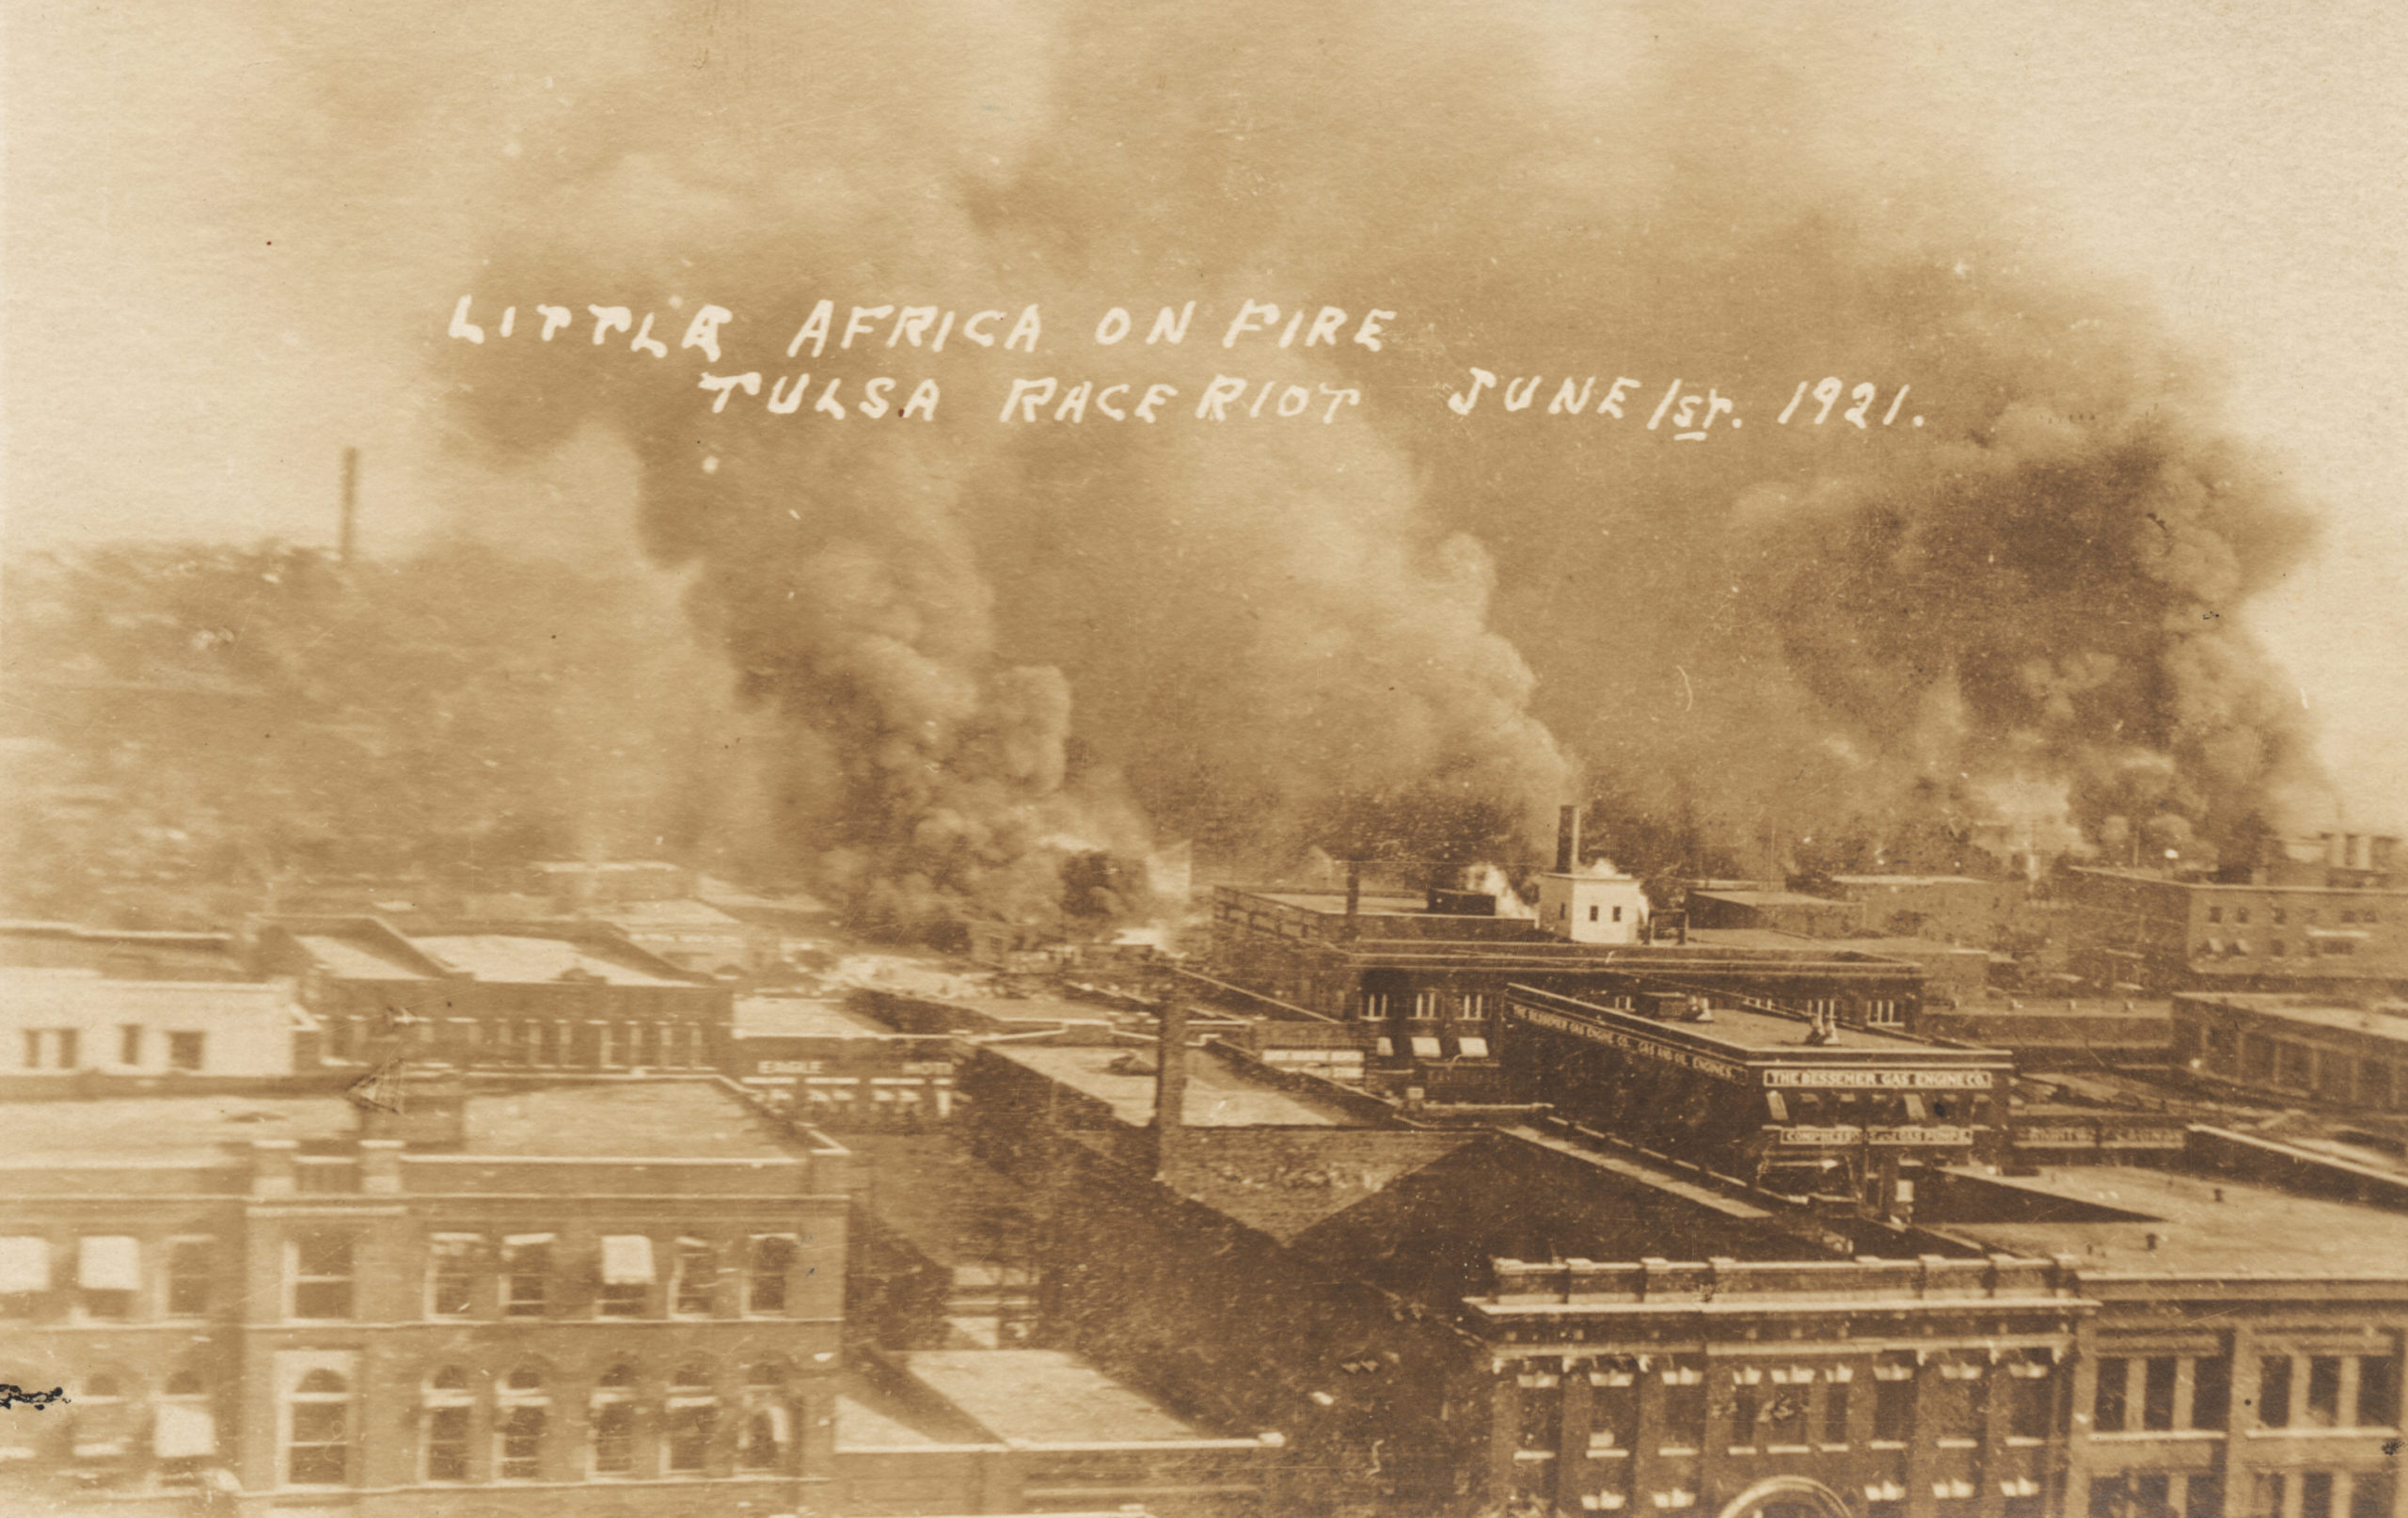 A postcard showing the scene from the roof of the Hotel Tulsa on 3rd St. between Boston Ave. and Cincinnati Ave.. The first row of buildings is along 2nd St. The smoke cloud on the left (Cincinnati Ave. and the Frisco Tracks) is identified in the Tulsa Tribune version of this photo as being where the fire started. Title is taken from the writing on the face of the postcard.